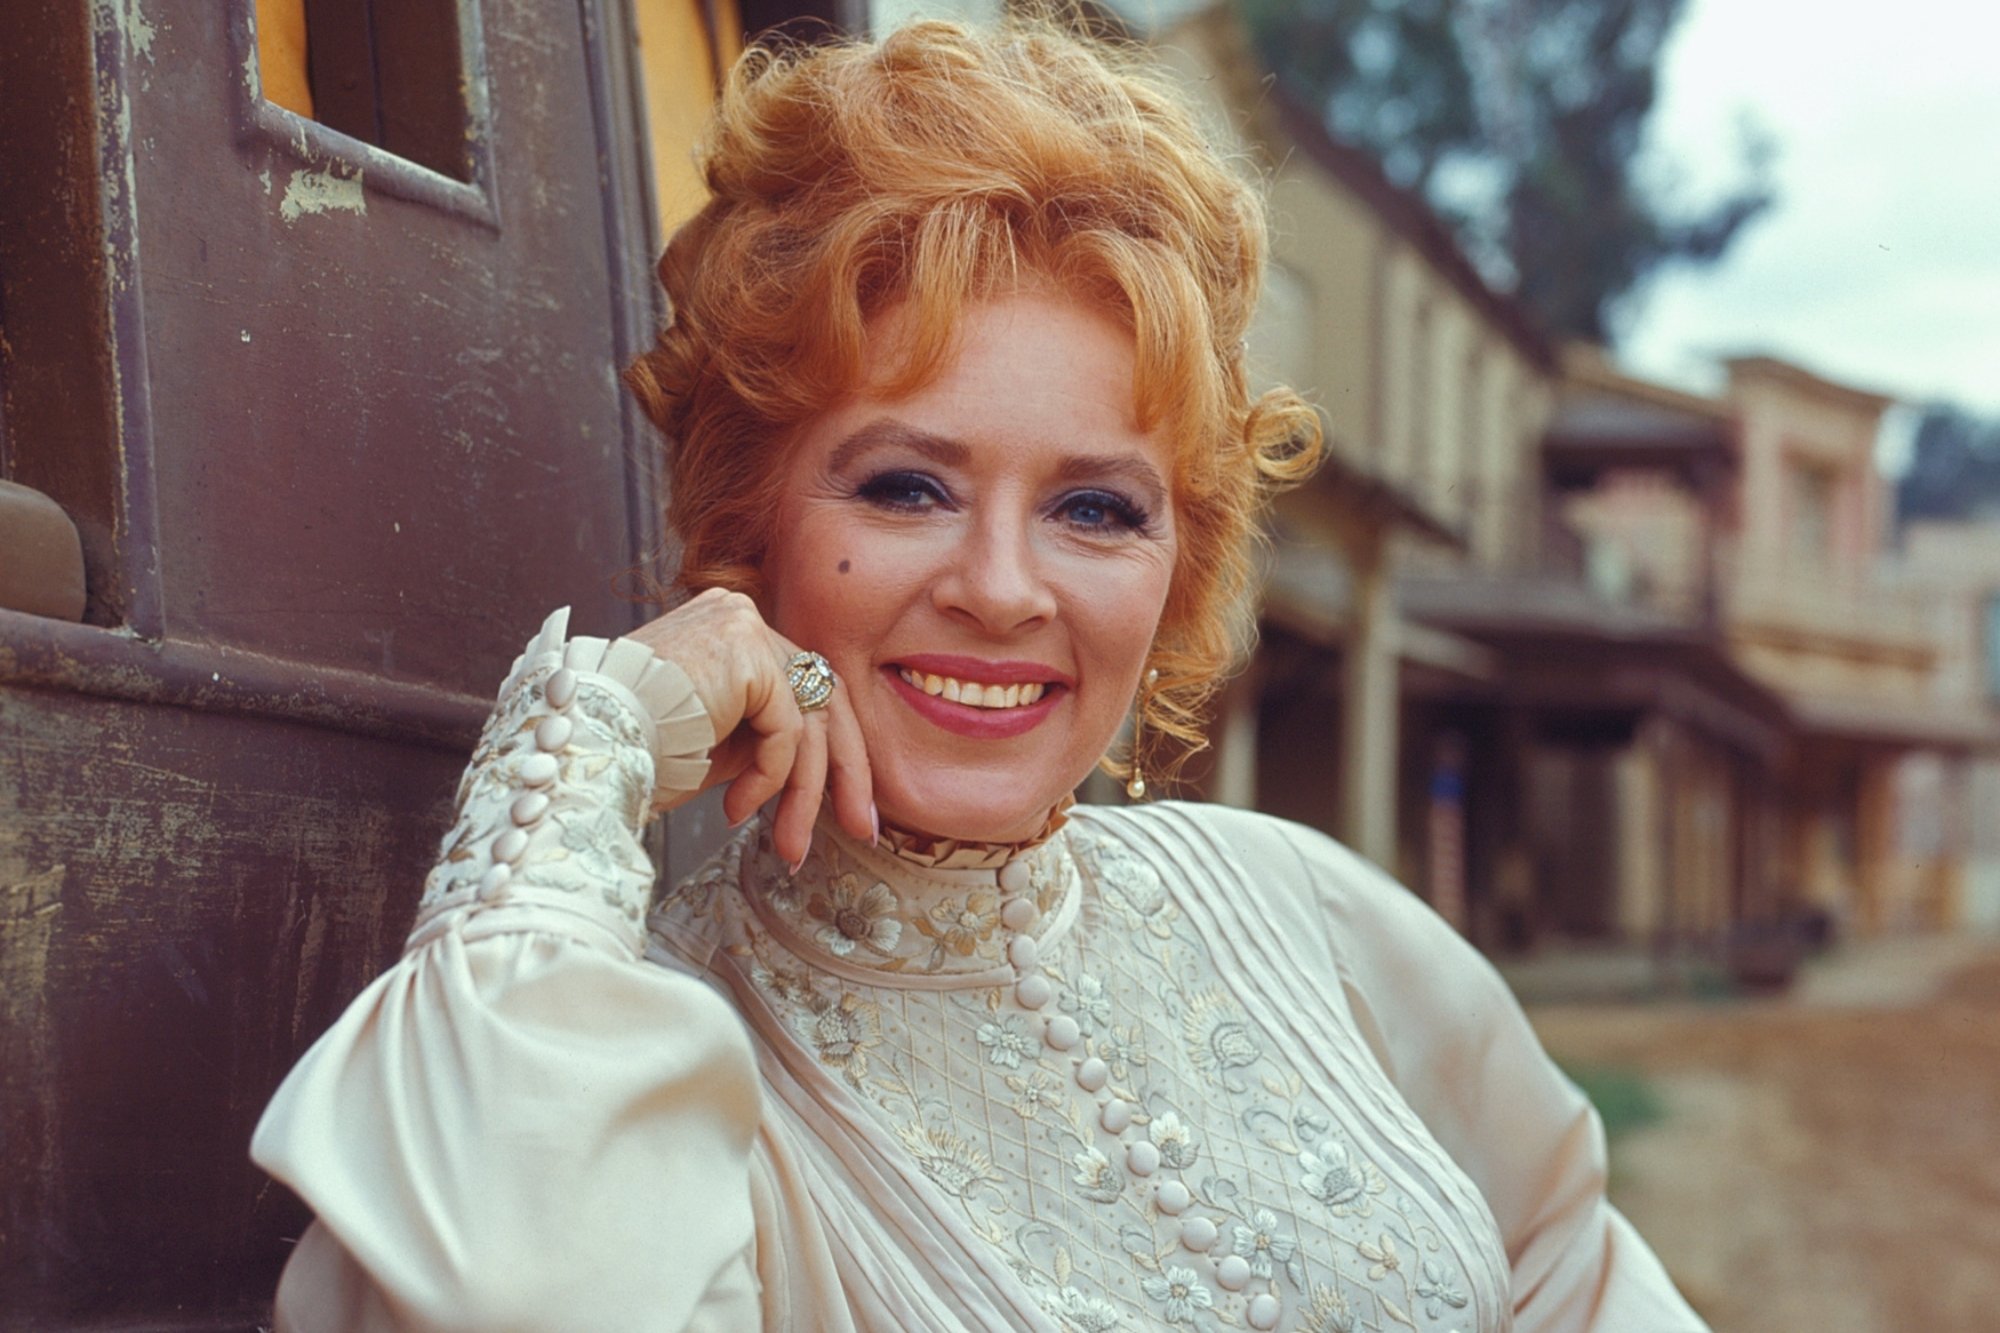 'Gunsmoke' Amanda Blake as Kitty Russell with her arm resting on a carriage as she's smiling.